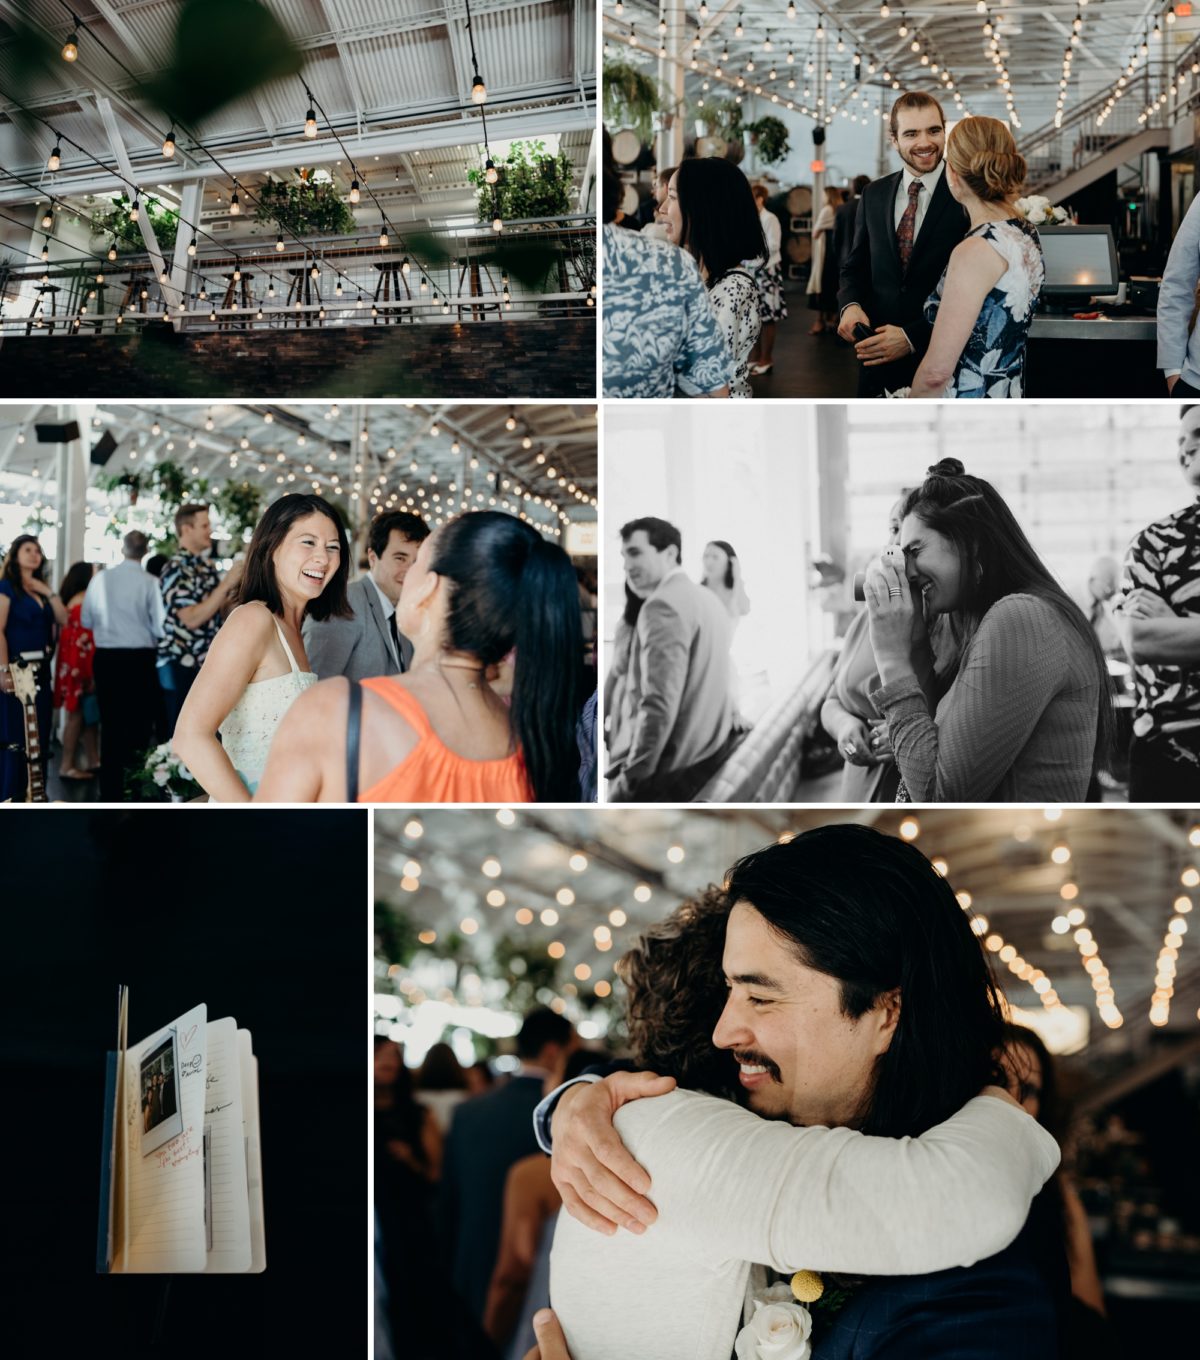 Candid wedding photography at Coopers Hall in Portland, OR by Briana Morrison Photography